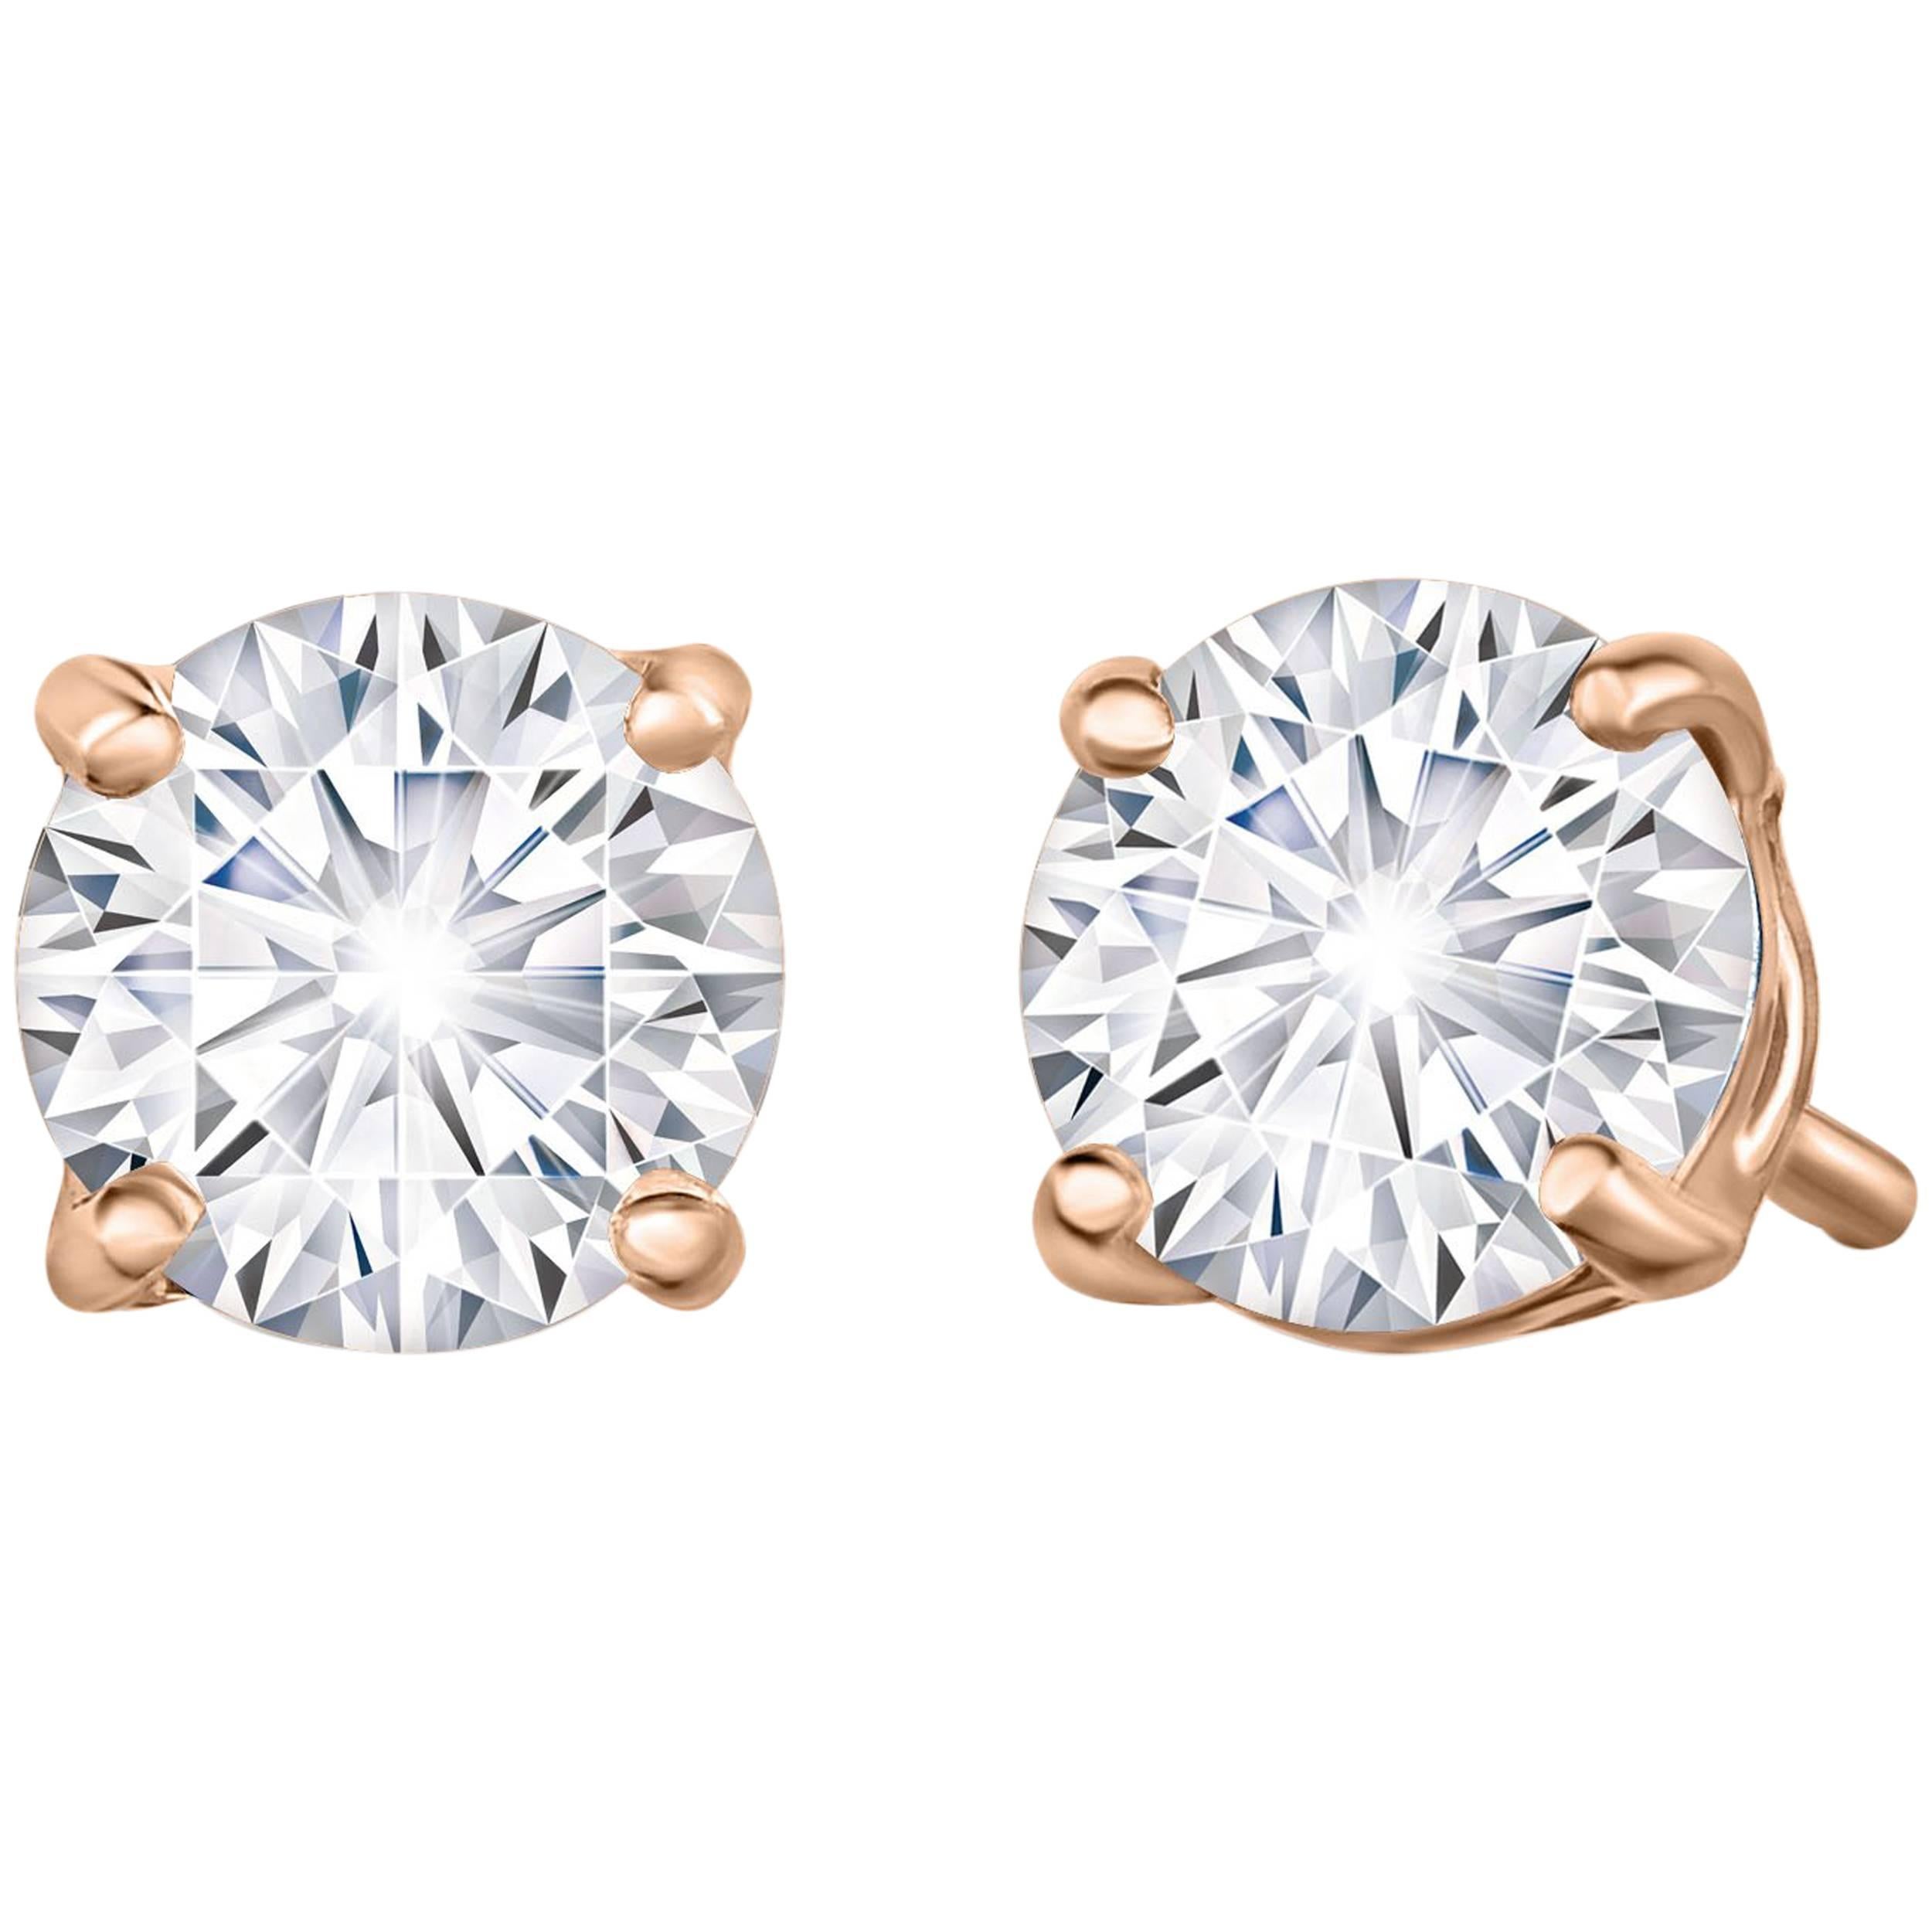 Marisa Perry 80 Point Forevermark Diamond Studs in Rose Gold